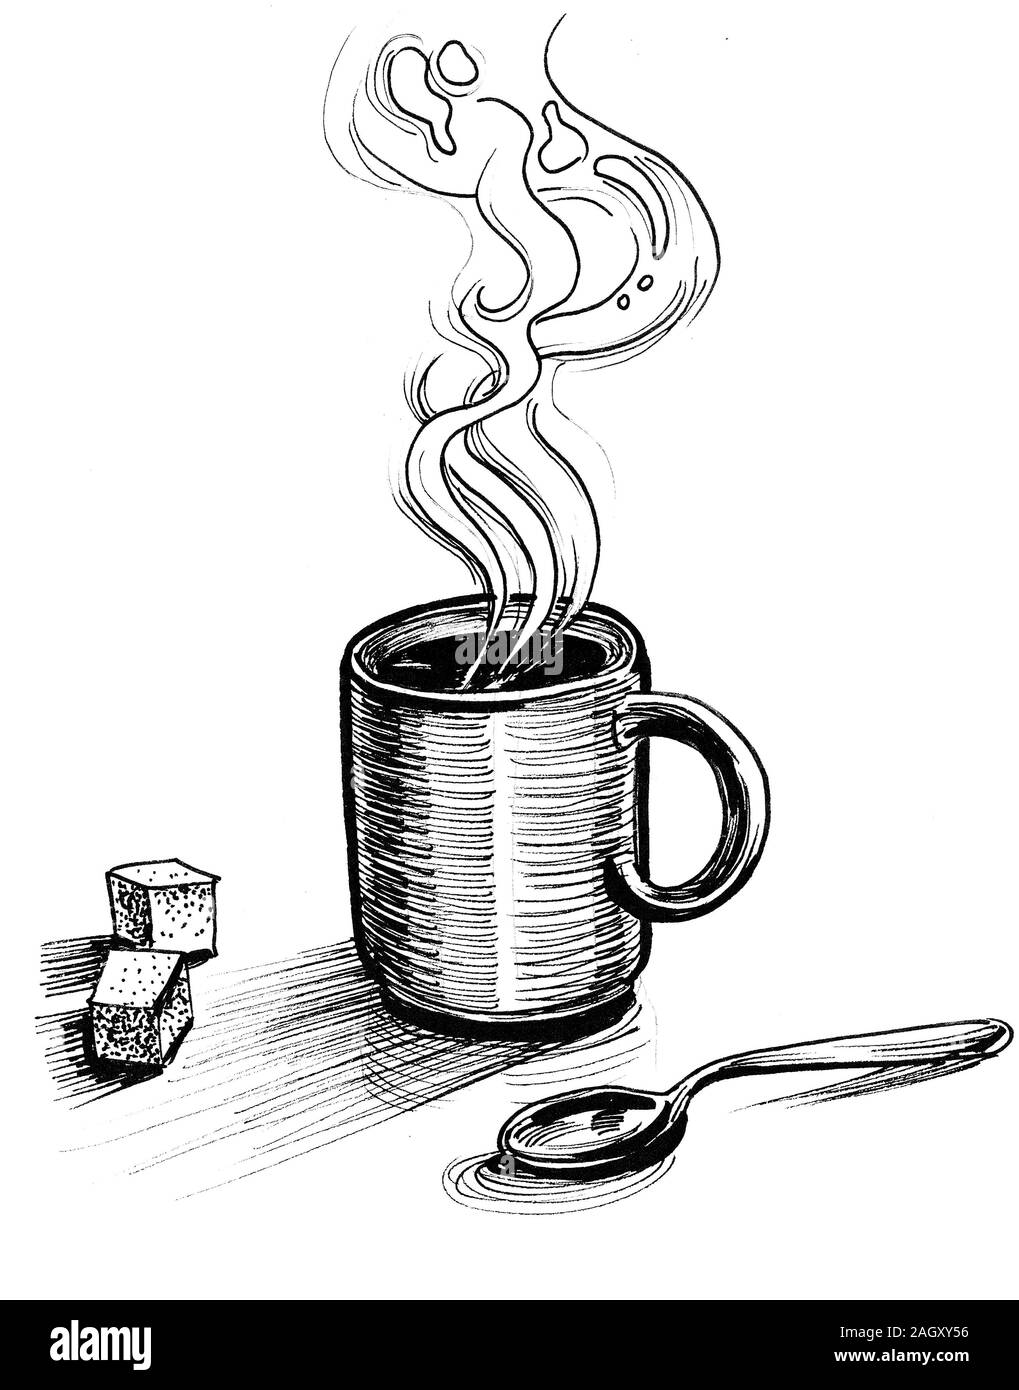 Cup Of Tea Spoon And Sugar Cubes Ink Black And White Drawing Stock Photo Alamy